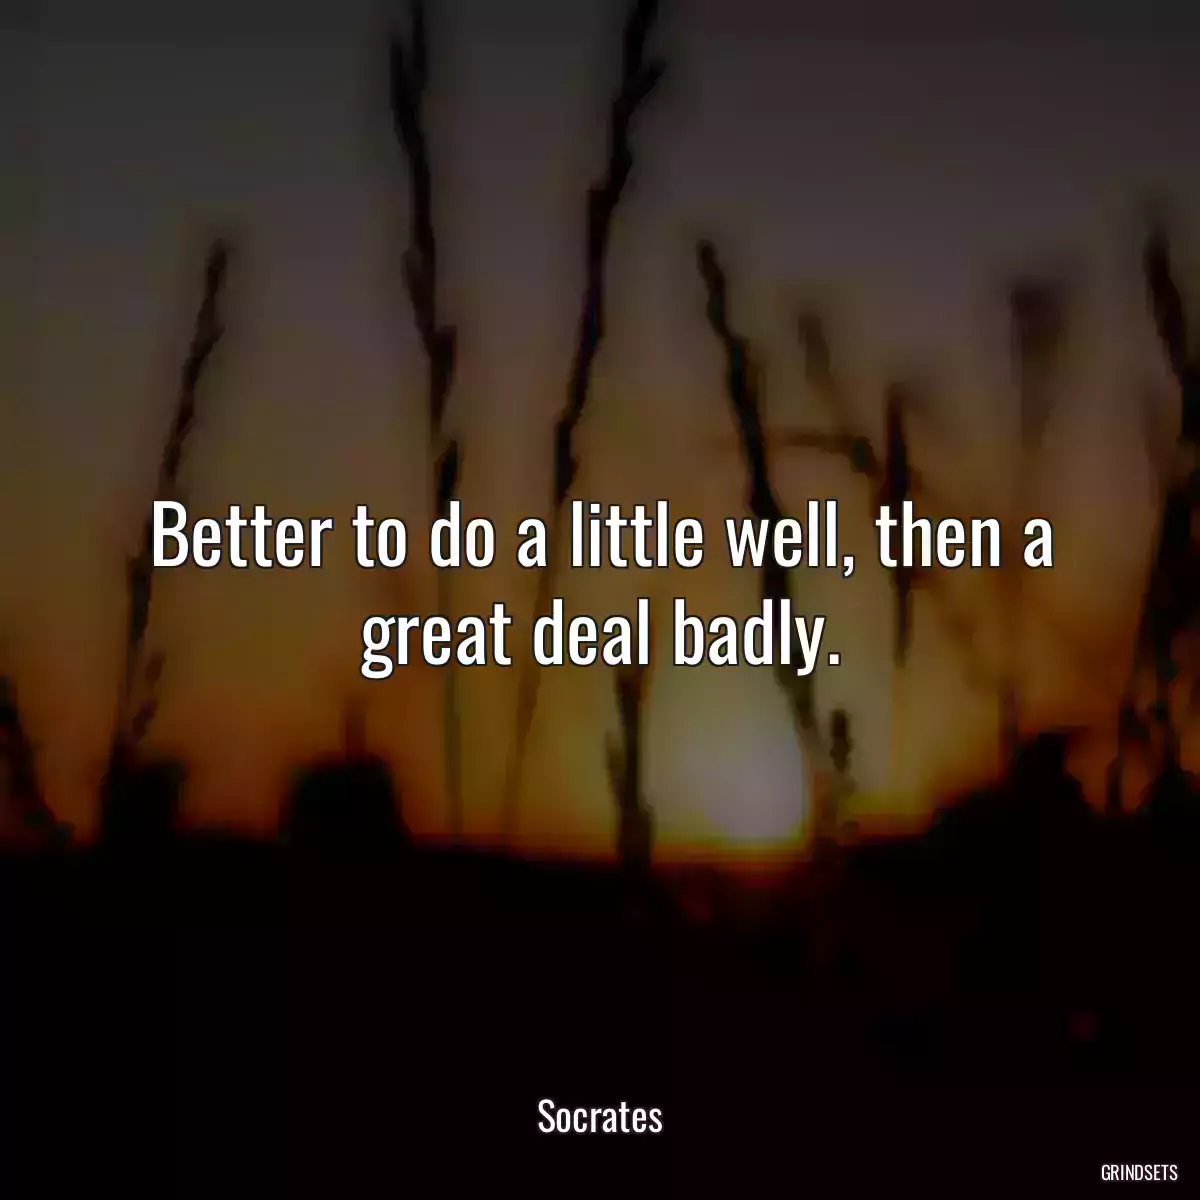 Better to do a little well, then a great deal badly.